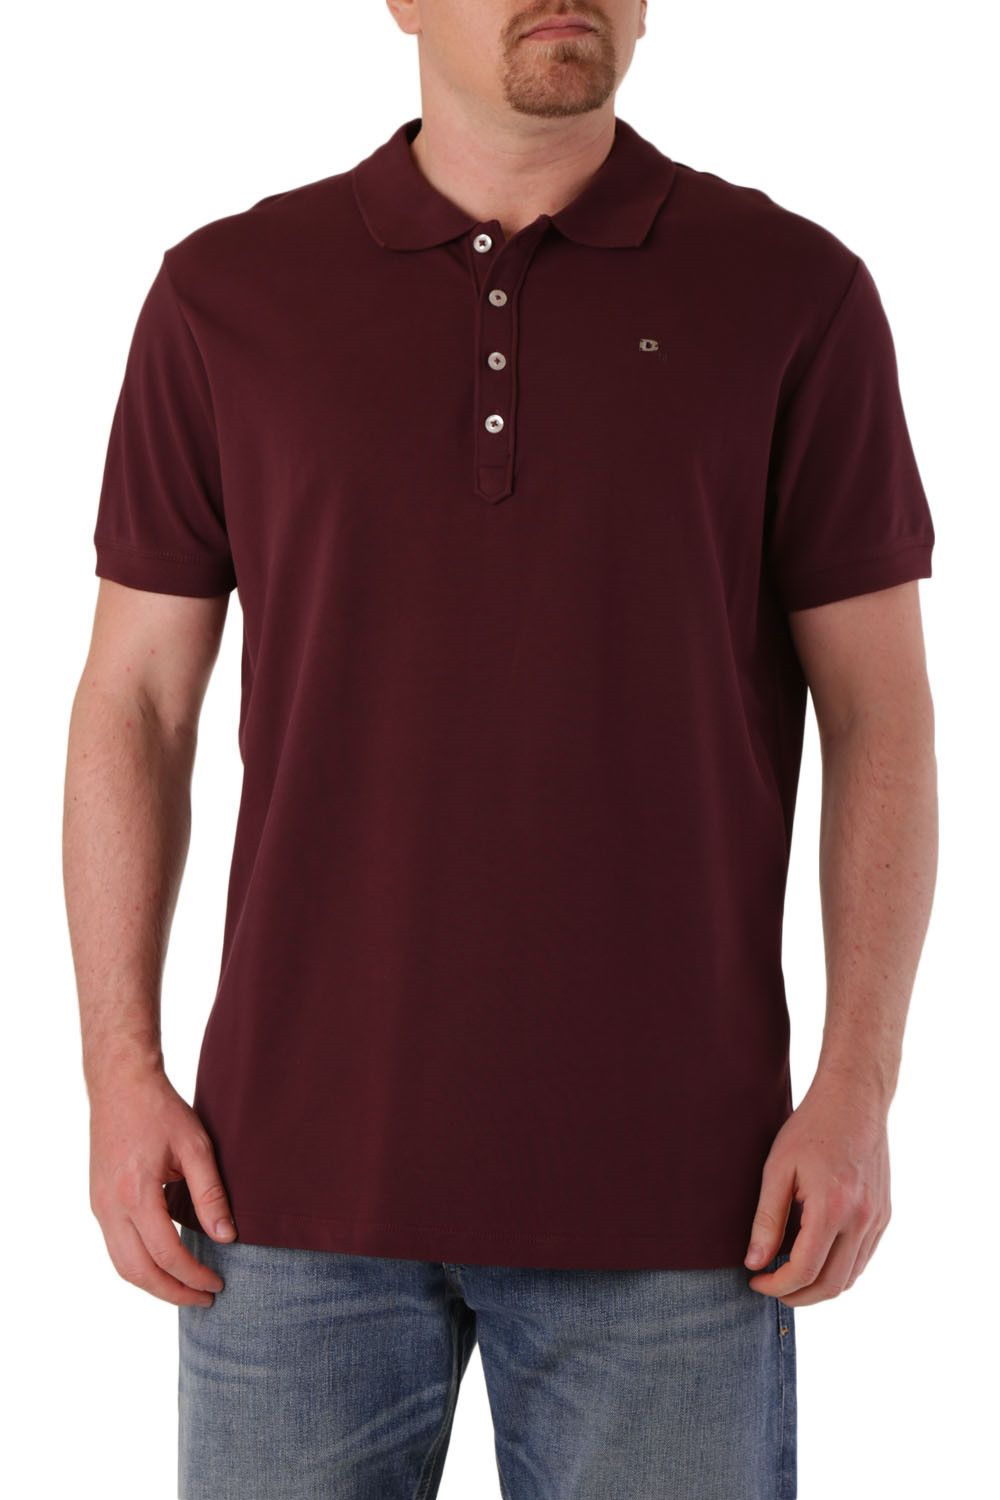 Brand: Diesel Gender: Men Type: Polo Season: Spring/Summer  PRODUCT DETAIL • Color: red • Pattern: plain • Fastening: buttons • Sleeves: short • Collar: classic  COMPOSITION AND MATERIAL • Composition: -95% cotton -5% elastane  •  Washing: machine wash at 30°